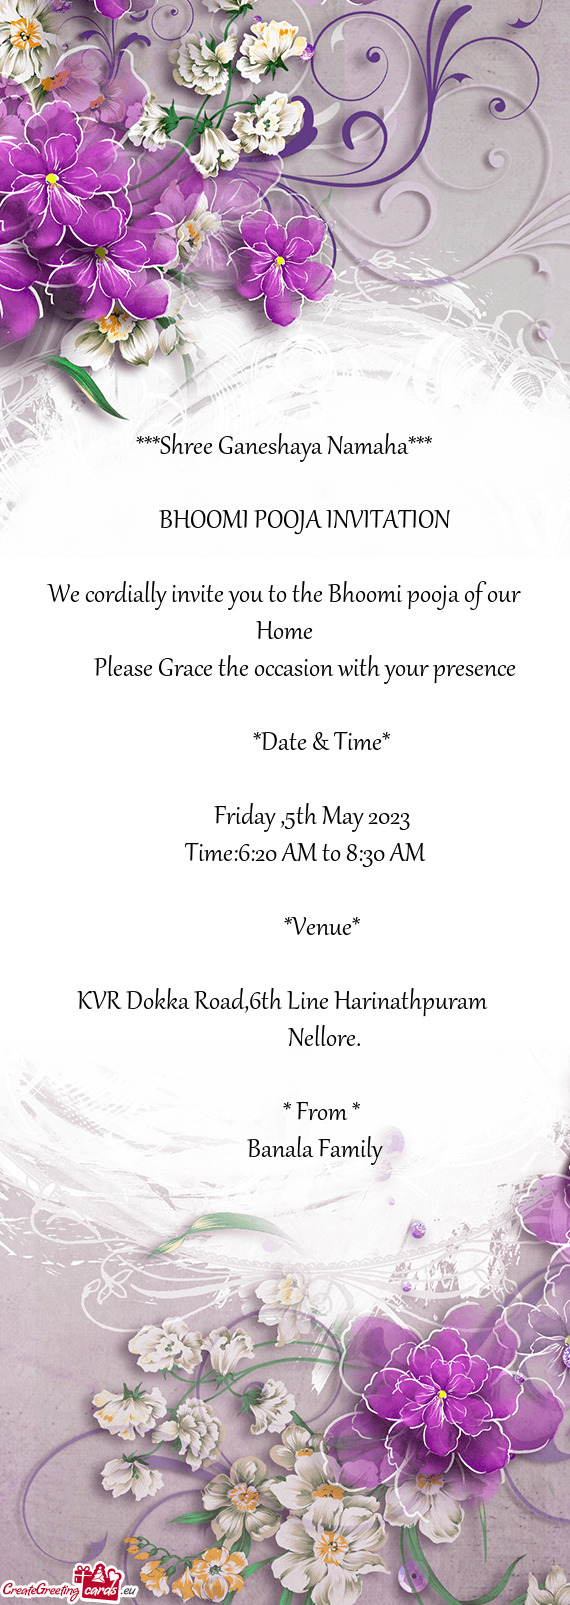 We cordially invite you to the Bhoomi pooja of our Home